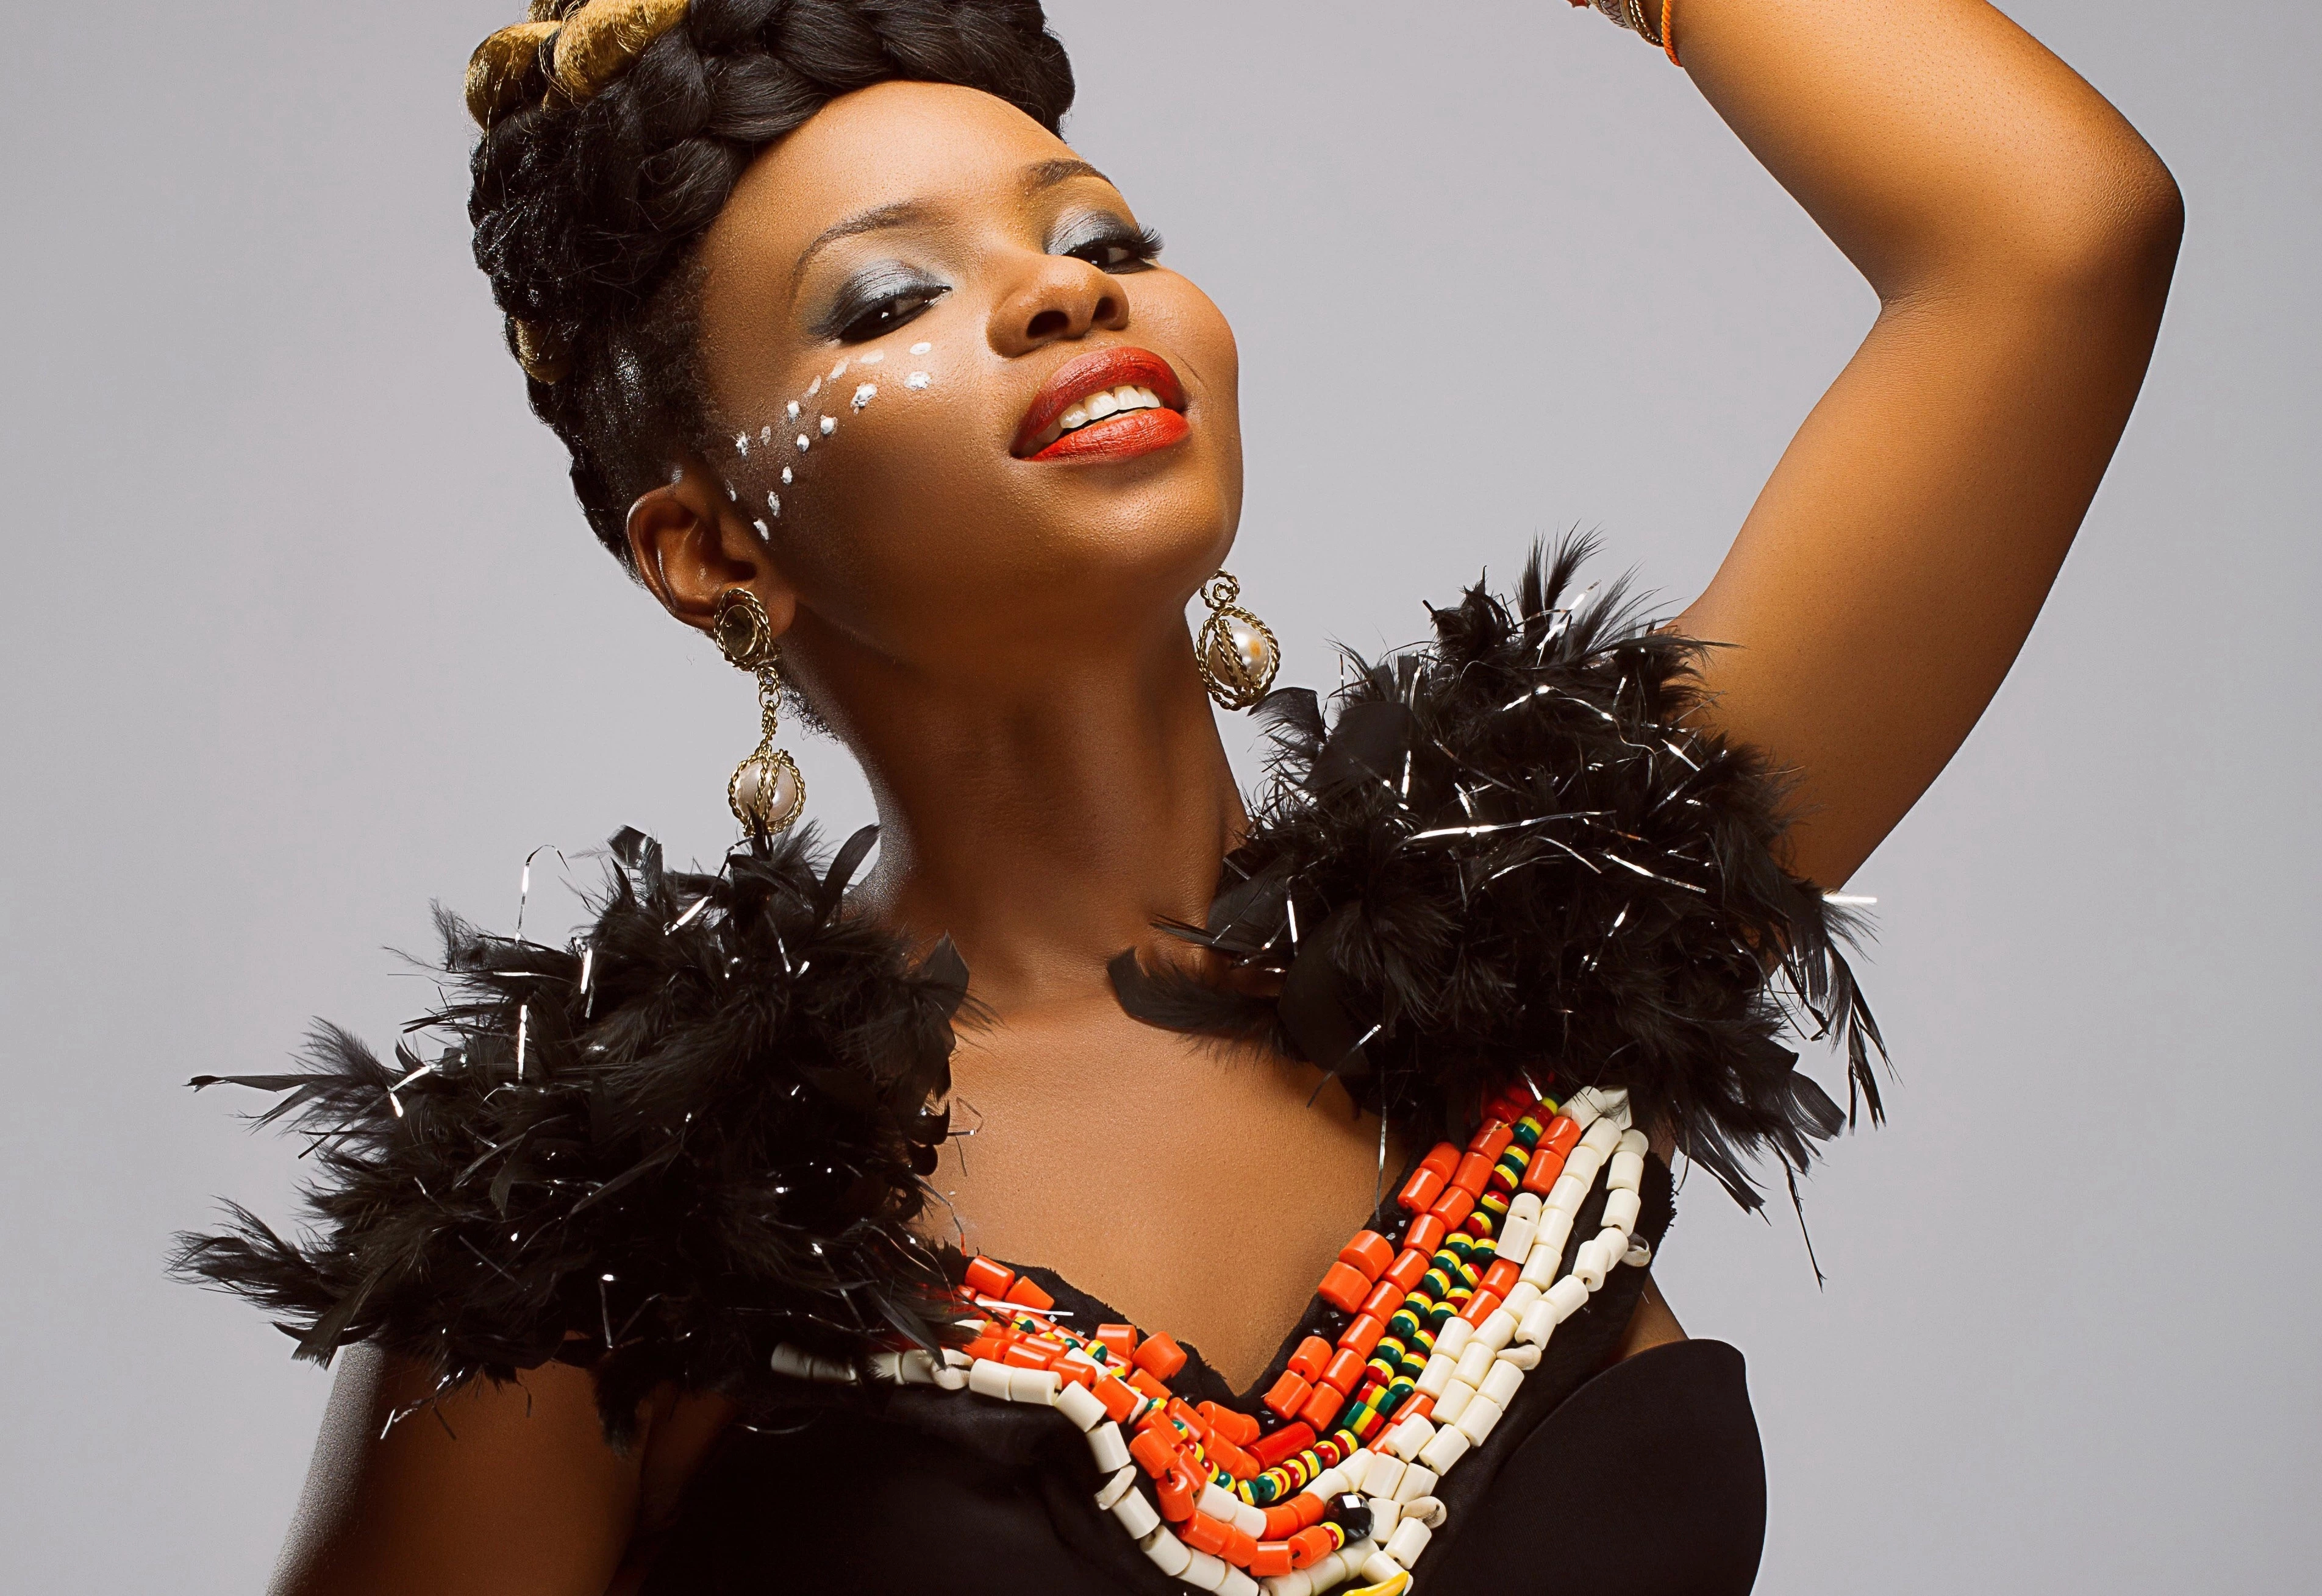 Yemi Alade: Biography, Songs, Awards, Nominations, Net worth 